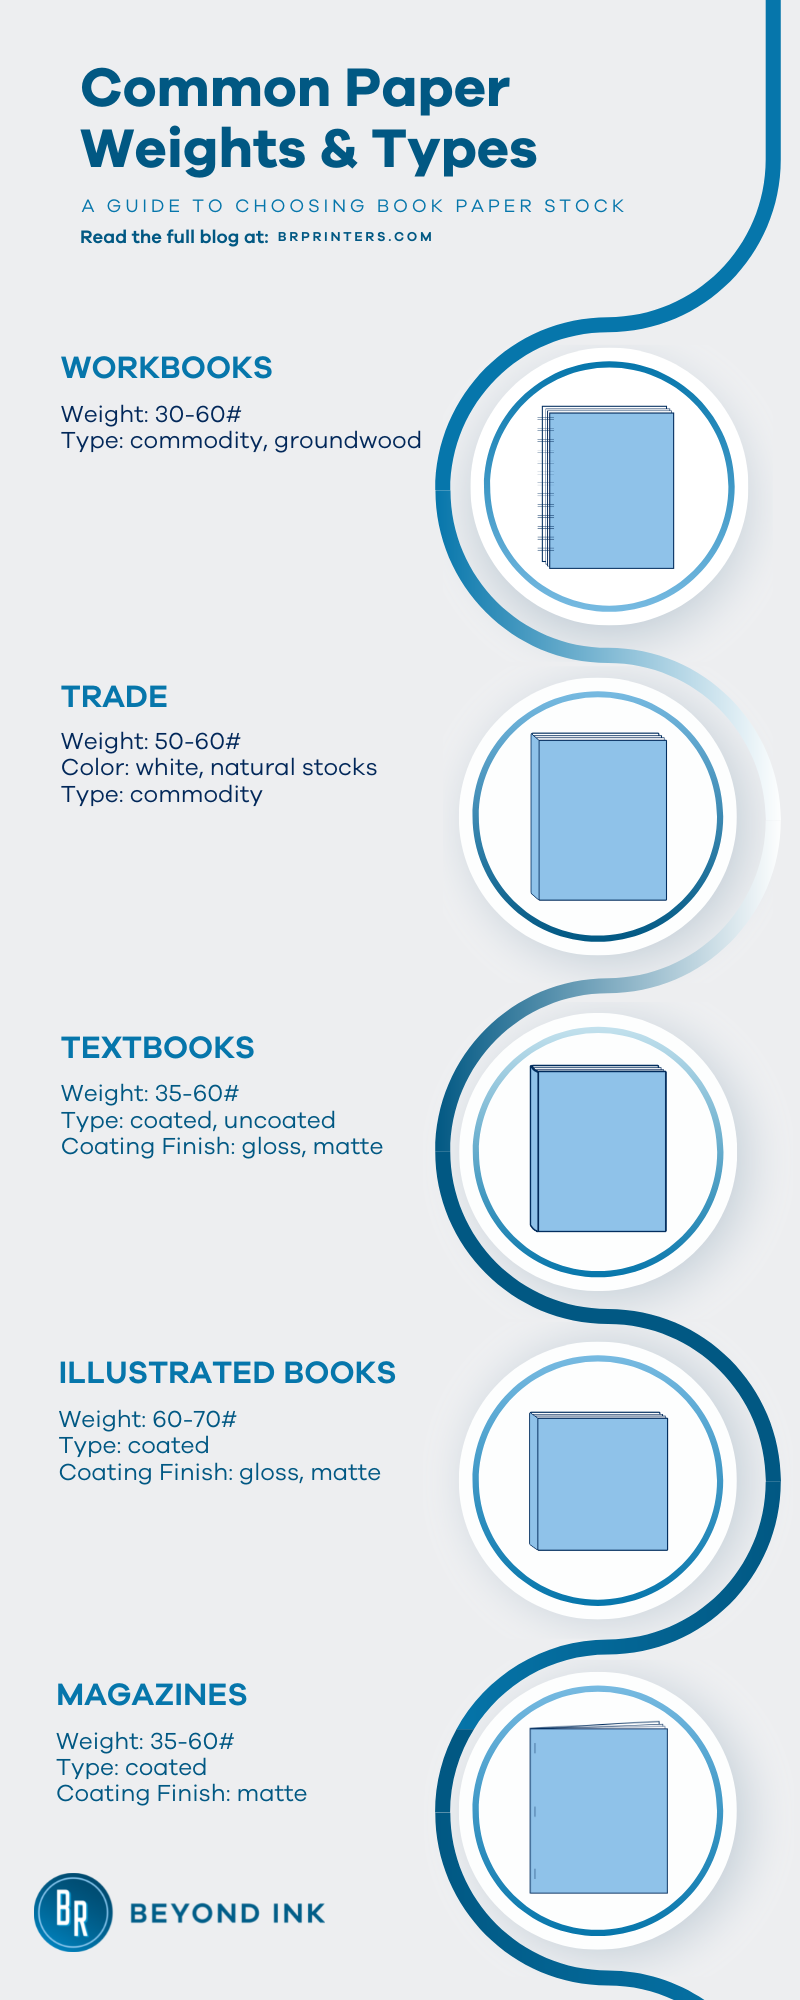 https://www.brprinters.com/wp-content/uploads/2023/01/2-final-common-paper-weights-types-infographic.png